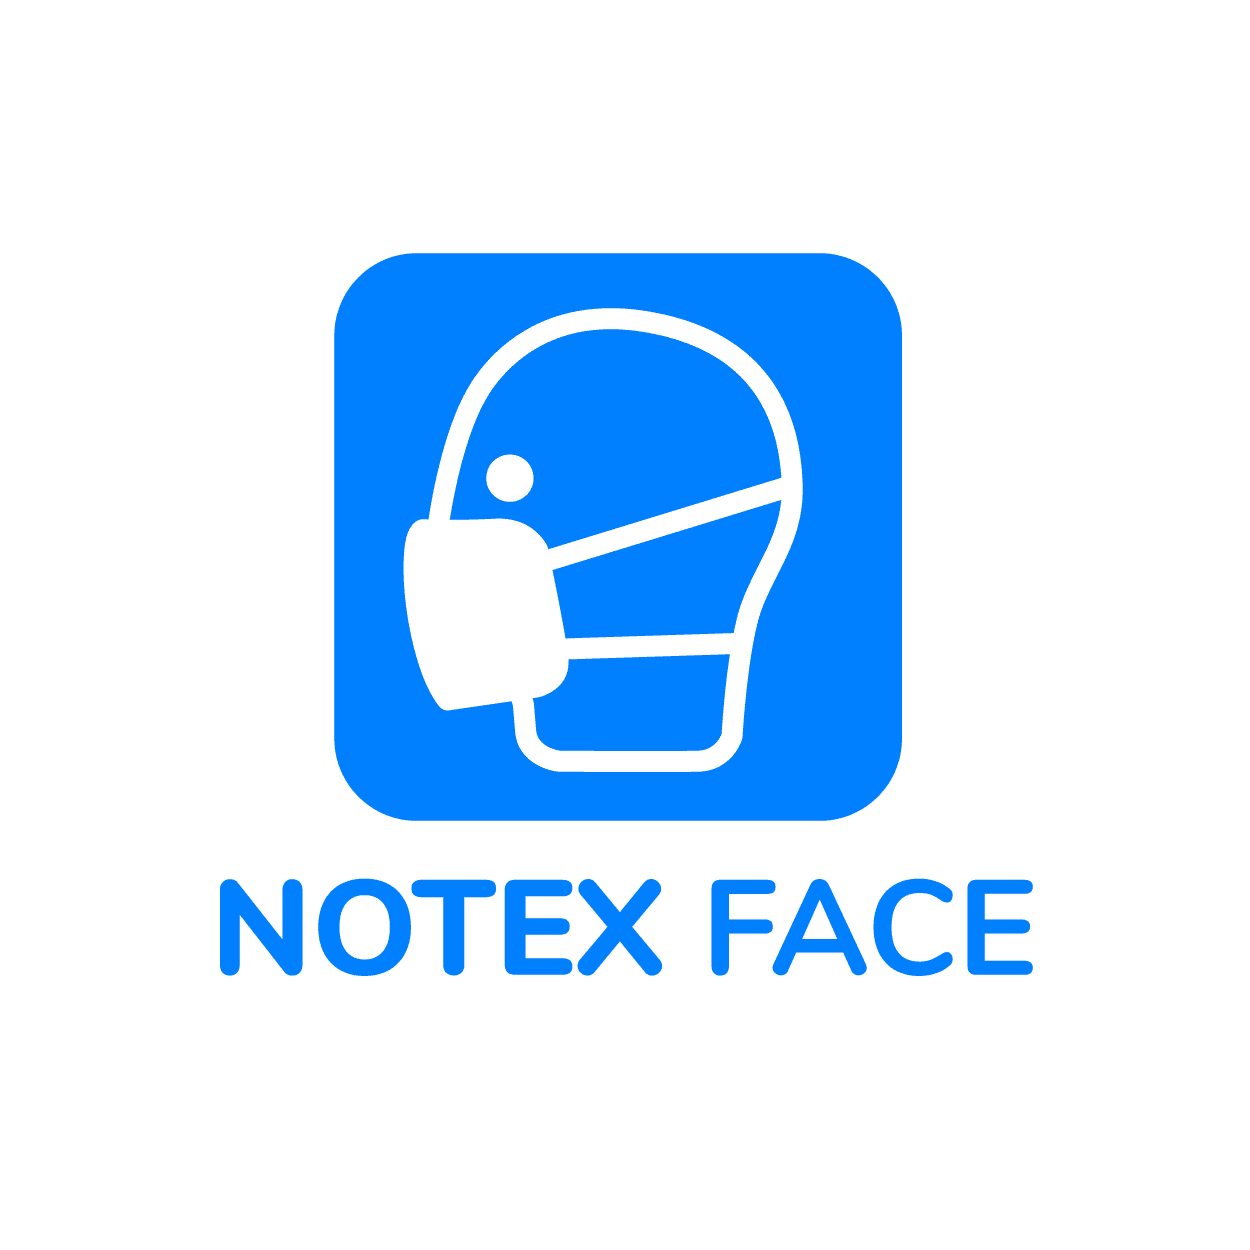 Note Face